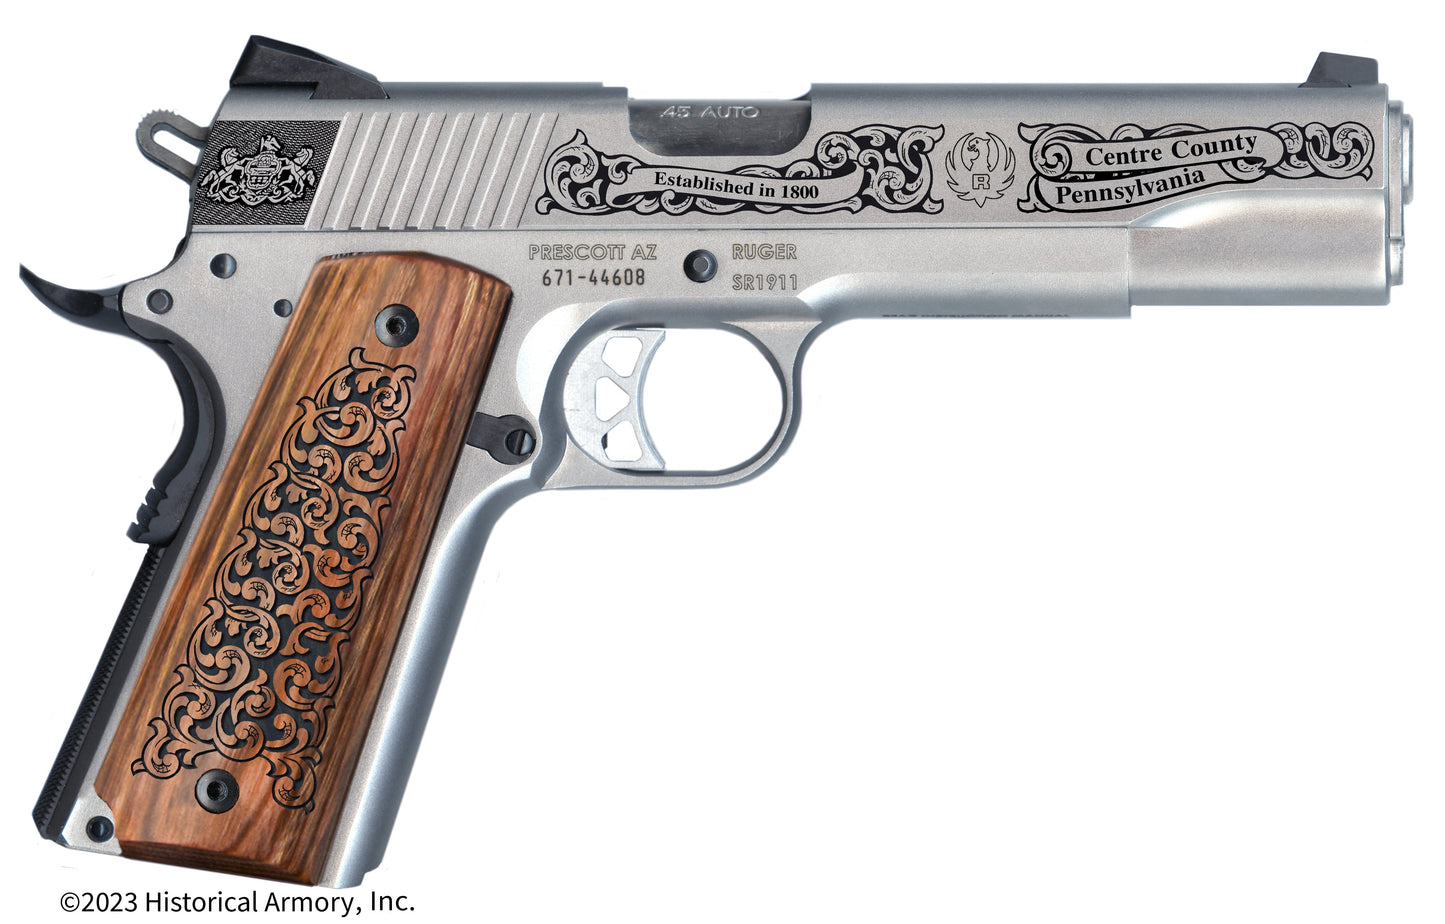 Centre County Pennsylvania Personalized Engraved .45 Auto Ruger 1911